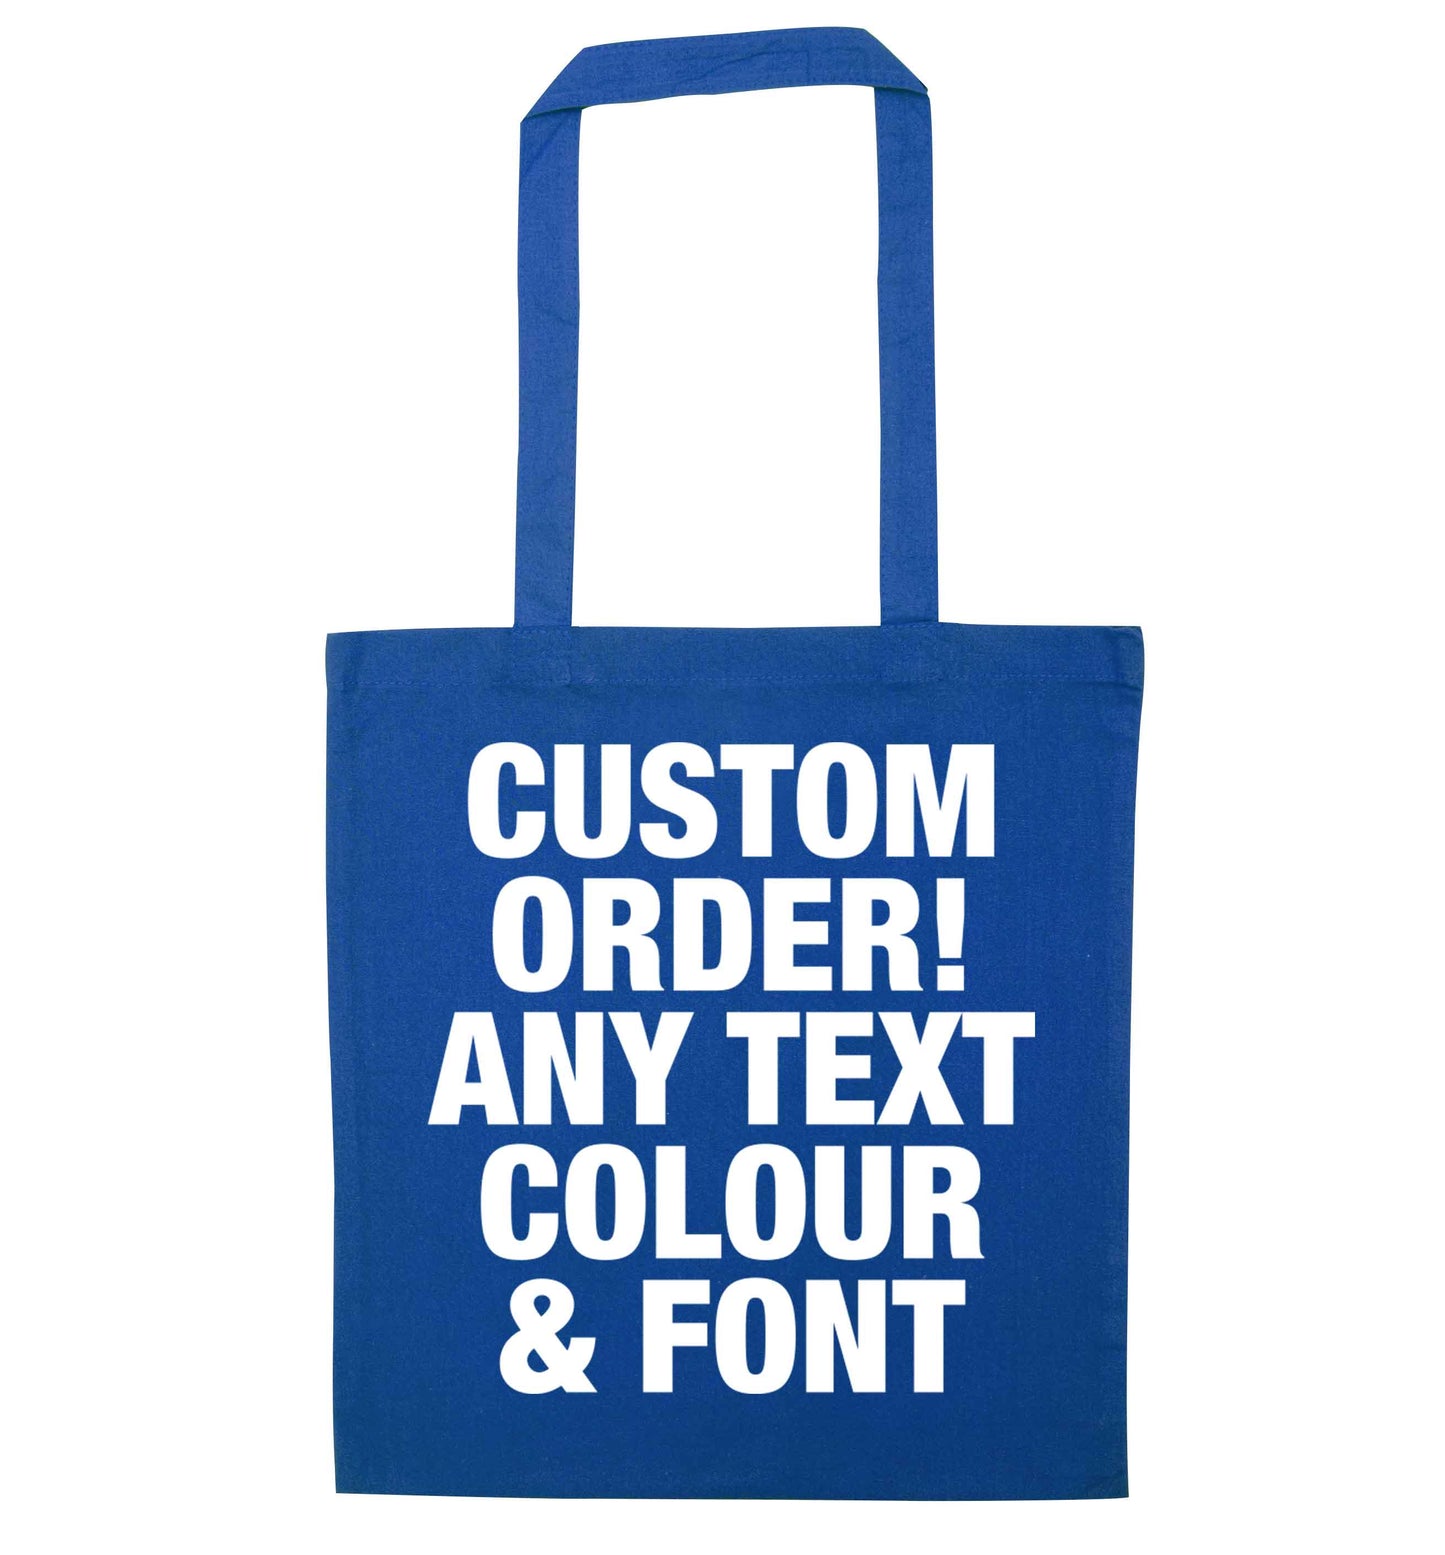 Custom order any text colour and font blue tote bag